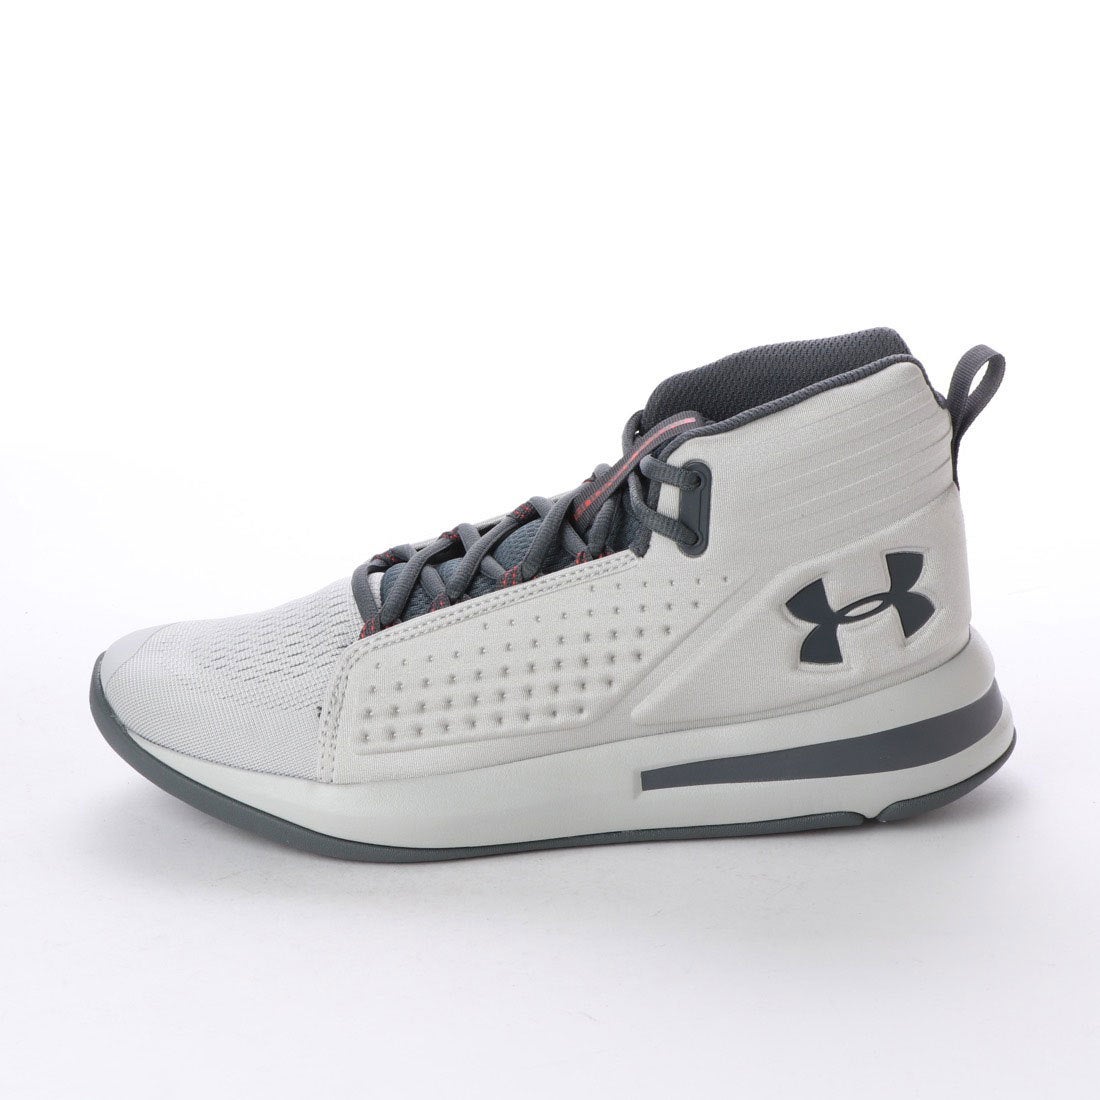 Under Armour Torch Mens Basketball Shoes 